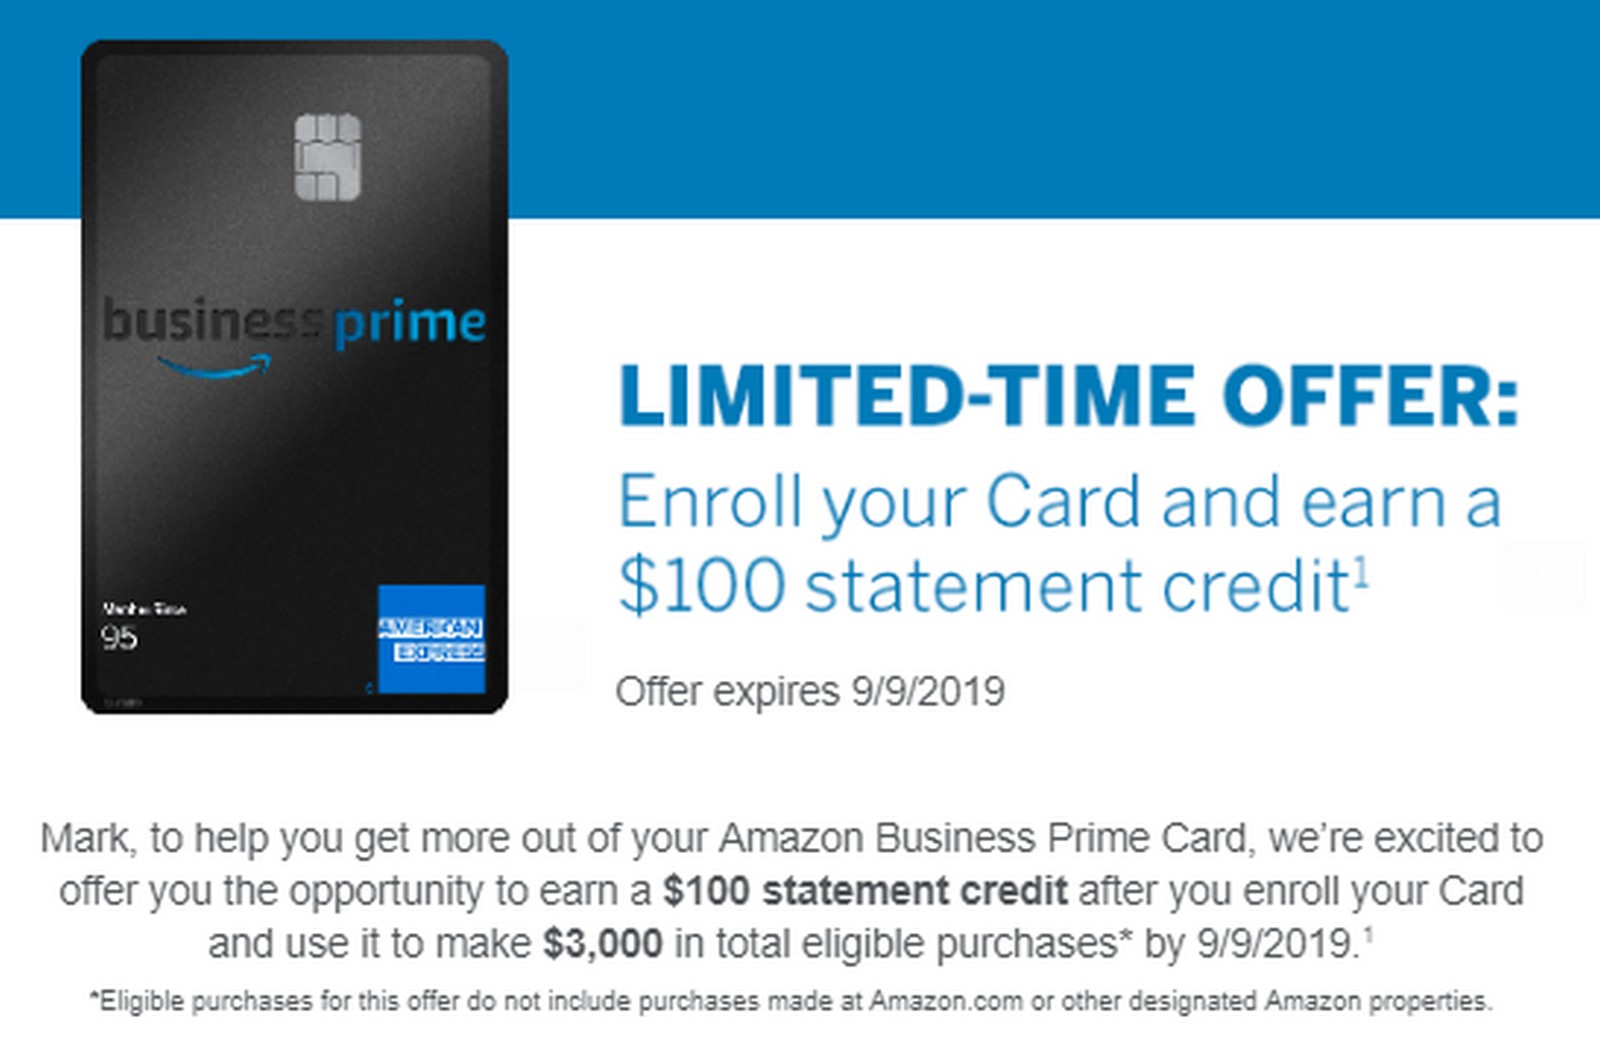 Amazon Business Prime Card Spending Offer